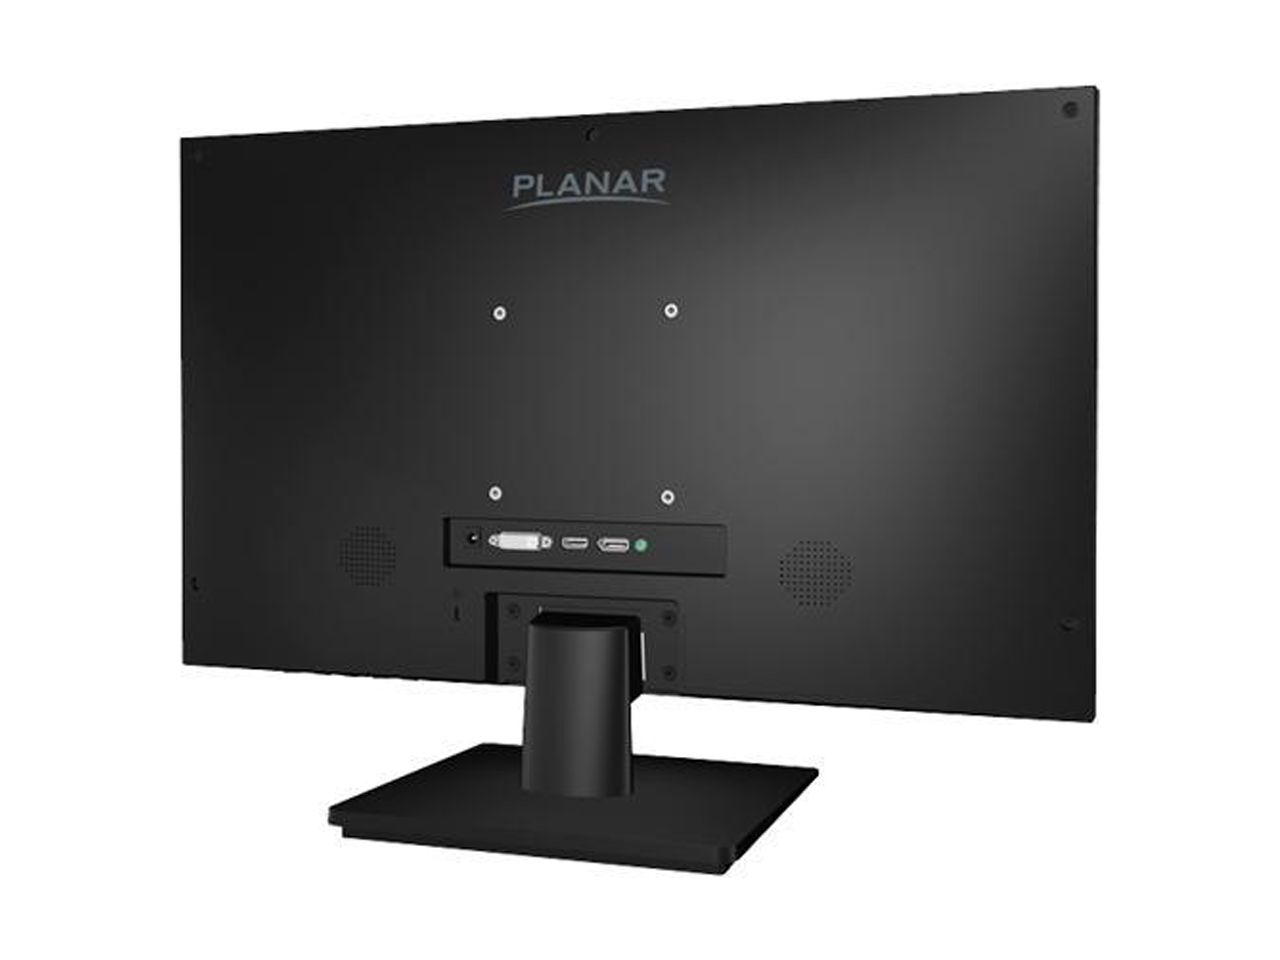 Planar PXN2490MW 24" (Actual size 23.8") Quad HD 2560 x 1440 2K Resolution 6 ms HDMI DisplayPort DVI-D Built-in Speakers Nearly Borderless Bezel Backlit LED IPS Monitor - image 2 of 2